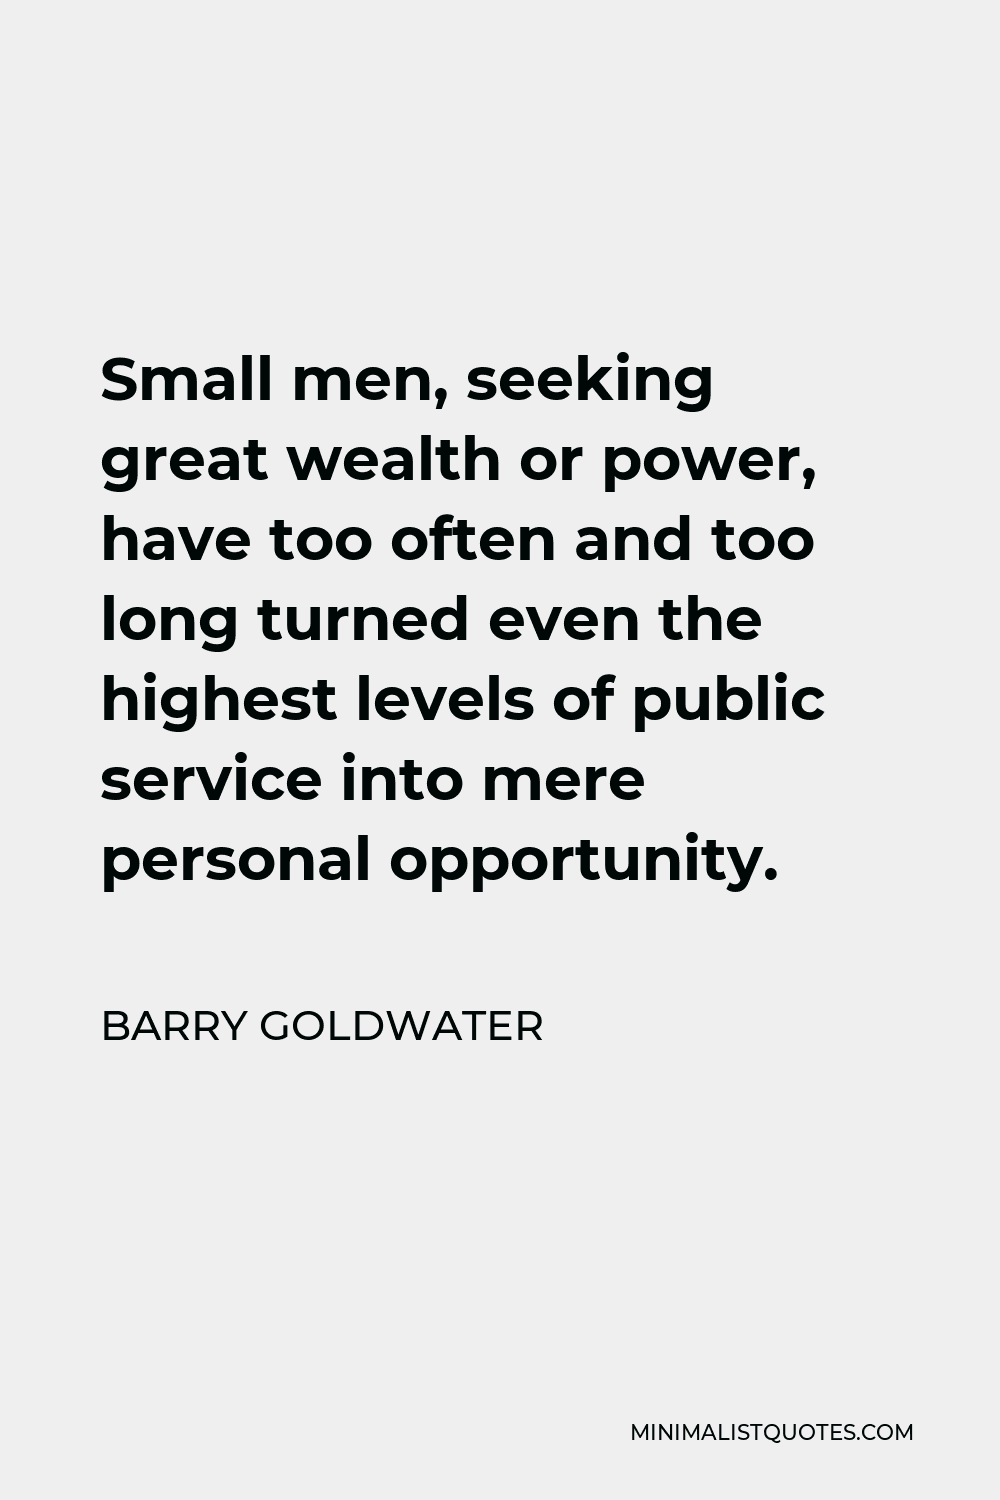 Barry Goldwater Quote - Small men, seeking great wealth or power, have too often and too long turned even the highest levels of public service into mere personal opportunity.